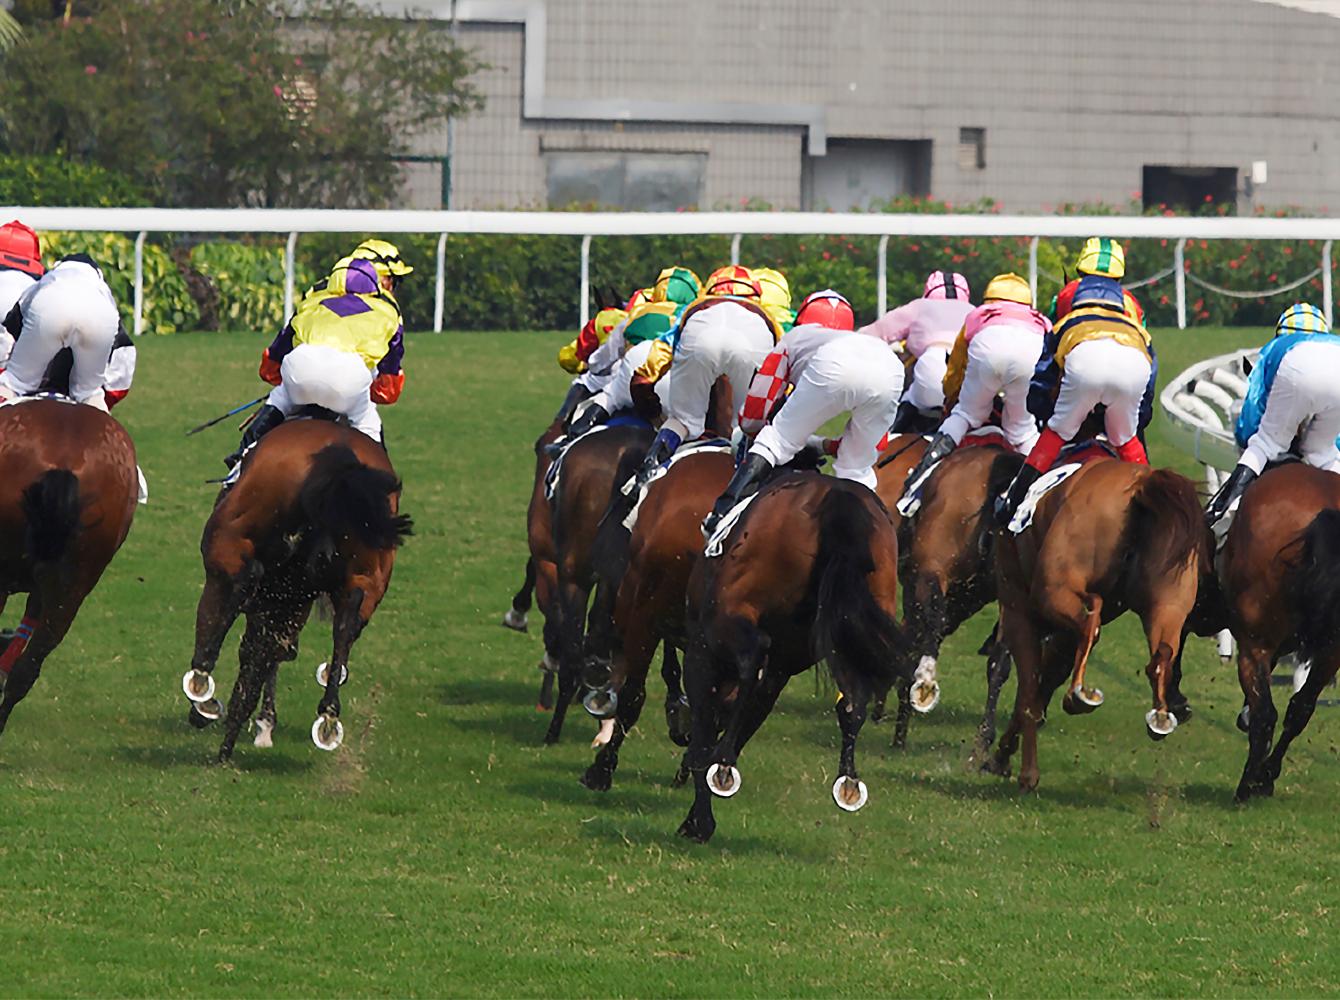 The entire field of competitors seen at the back in a Flat racing contest